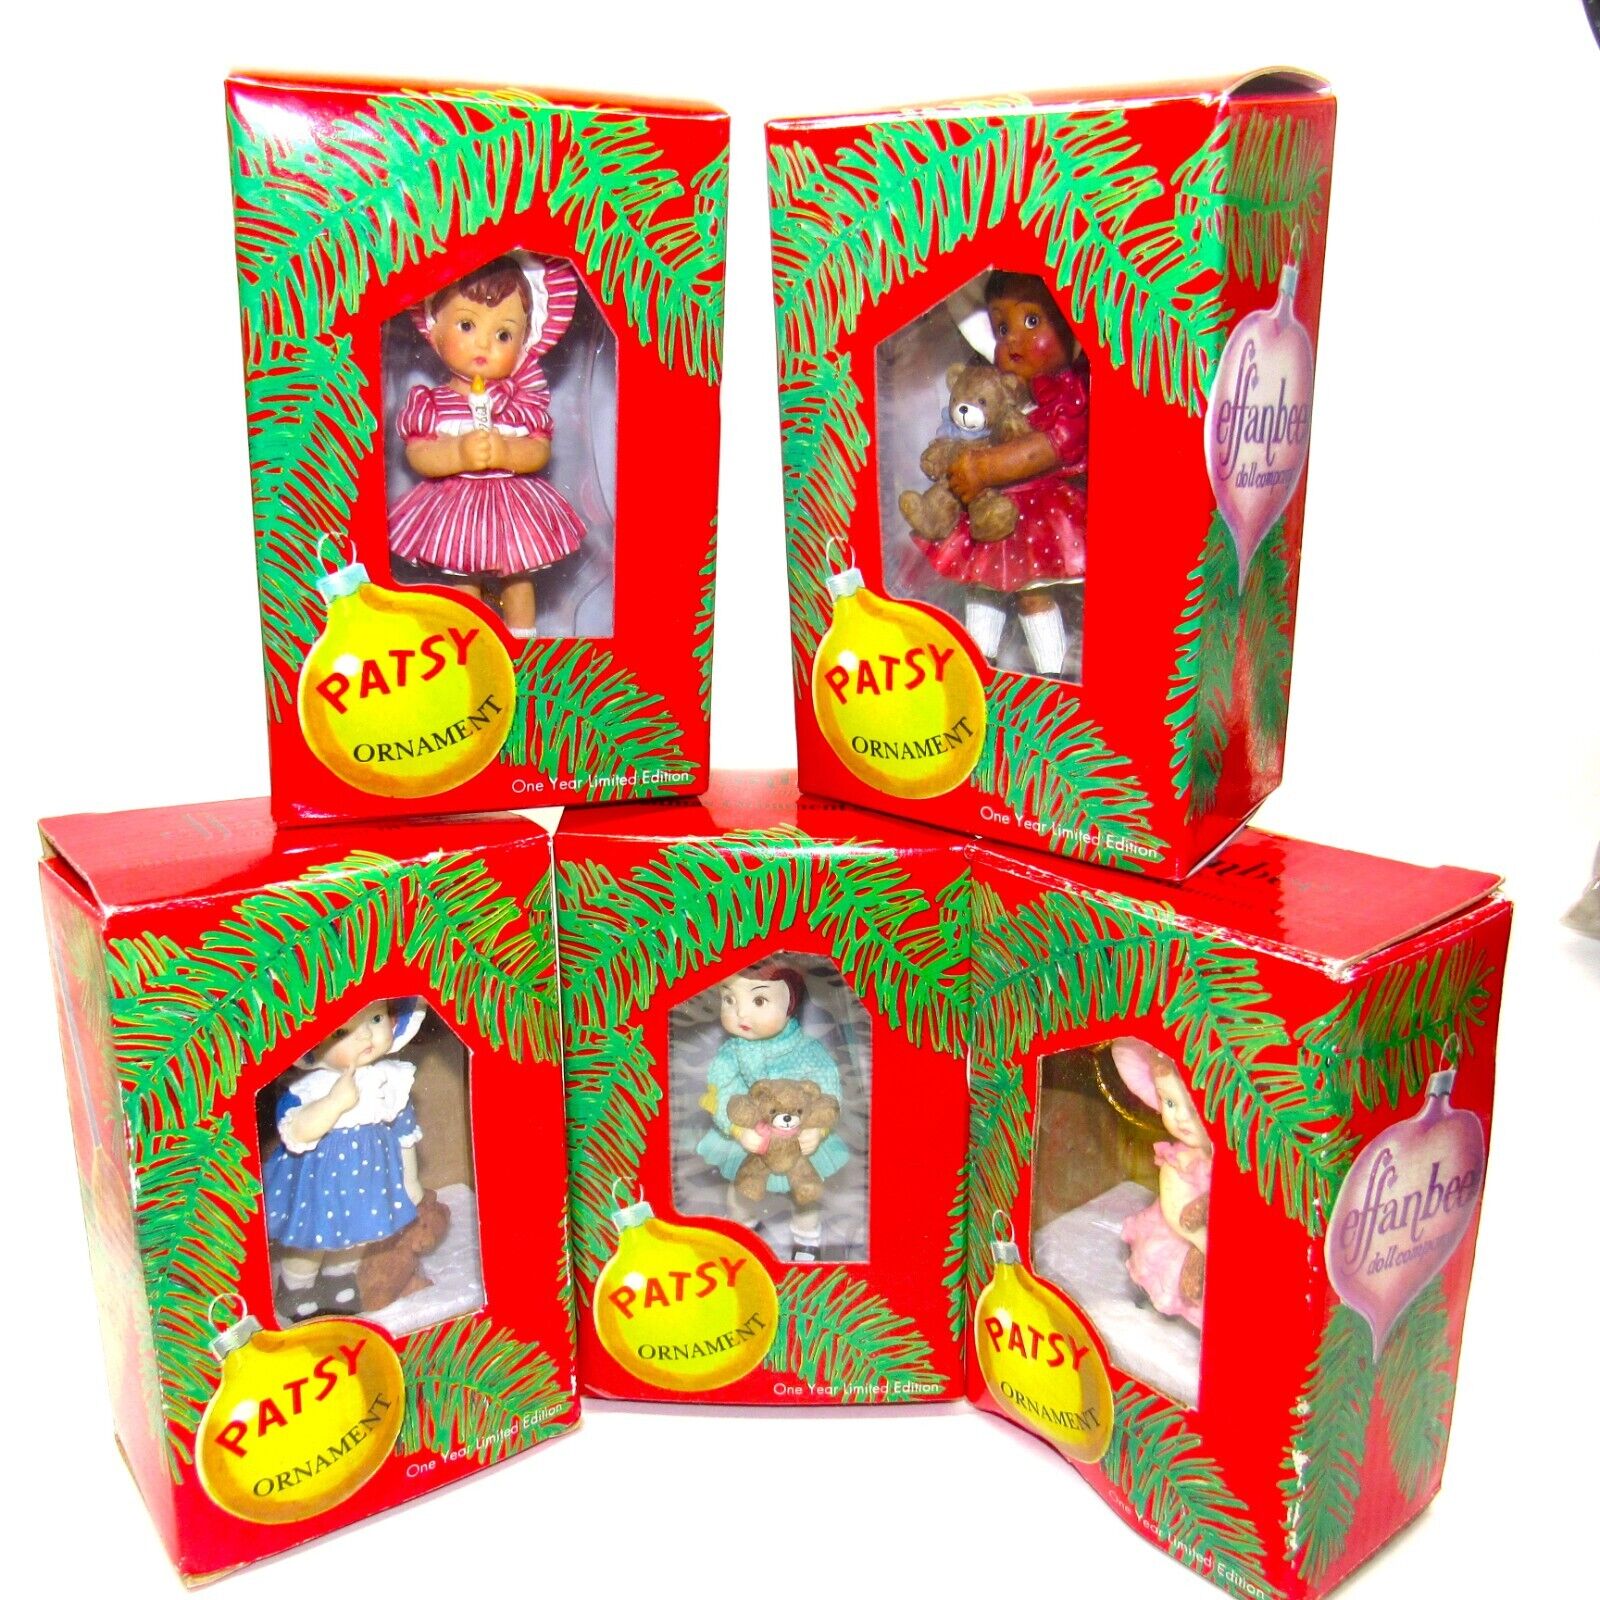 Vintage Lot of 5 Effanbee PATSY DOLL Christmas Ornaments 1995-96 NEVER OPENED